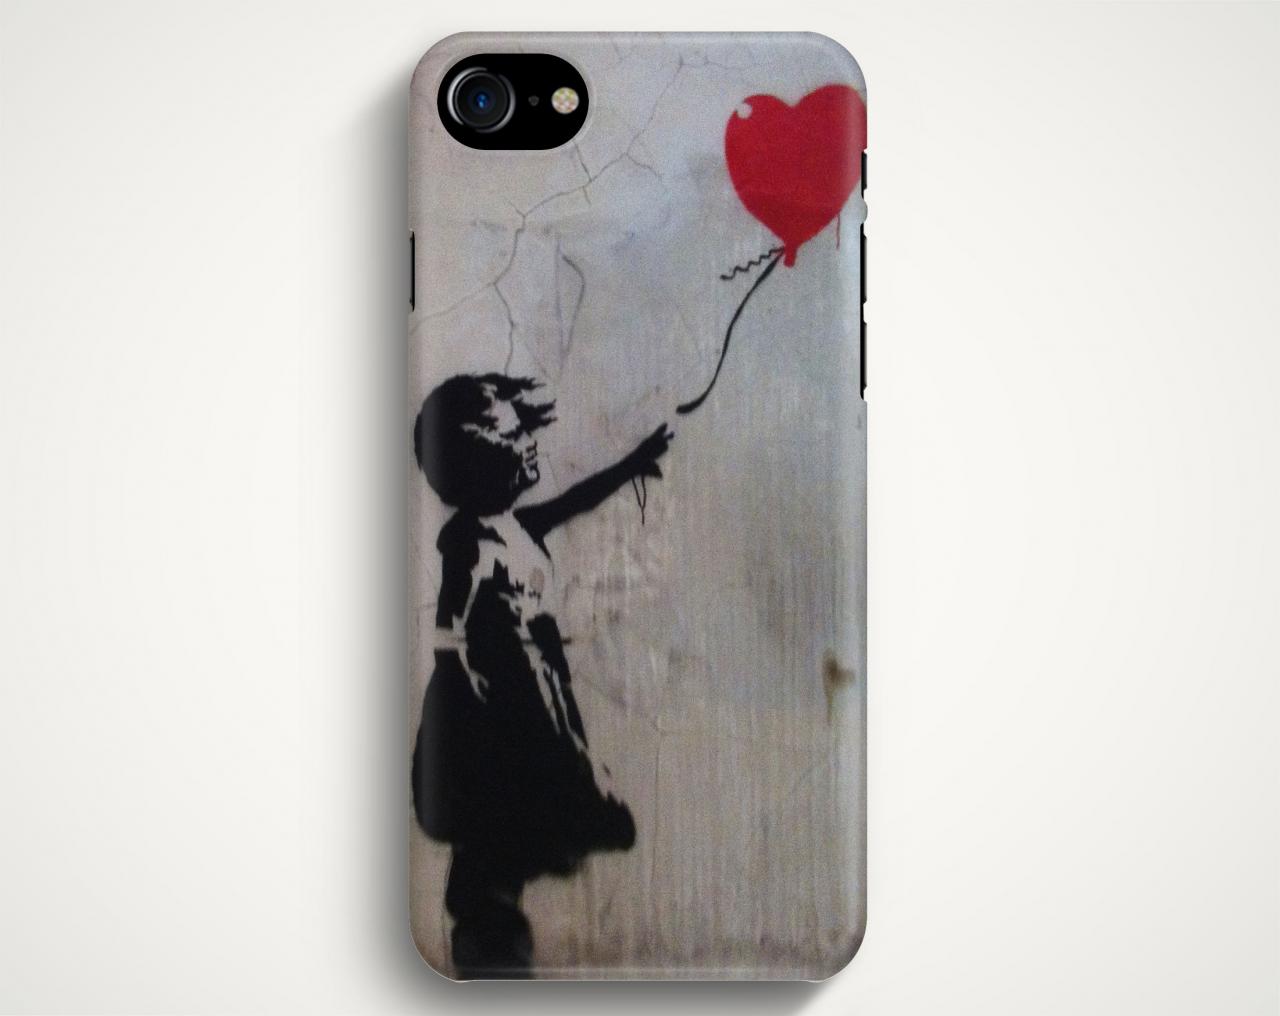 Girl With Balloon On Case For Iphone 7 Iphone 7 Plus Samsung Galaxy S8 Galaxy S7 Galaxy A3 Galaxy A5 Galaxy A7 Lg G6 Lg G5 Htc 10